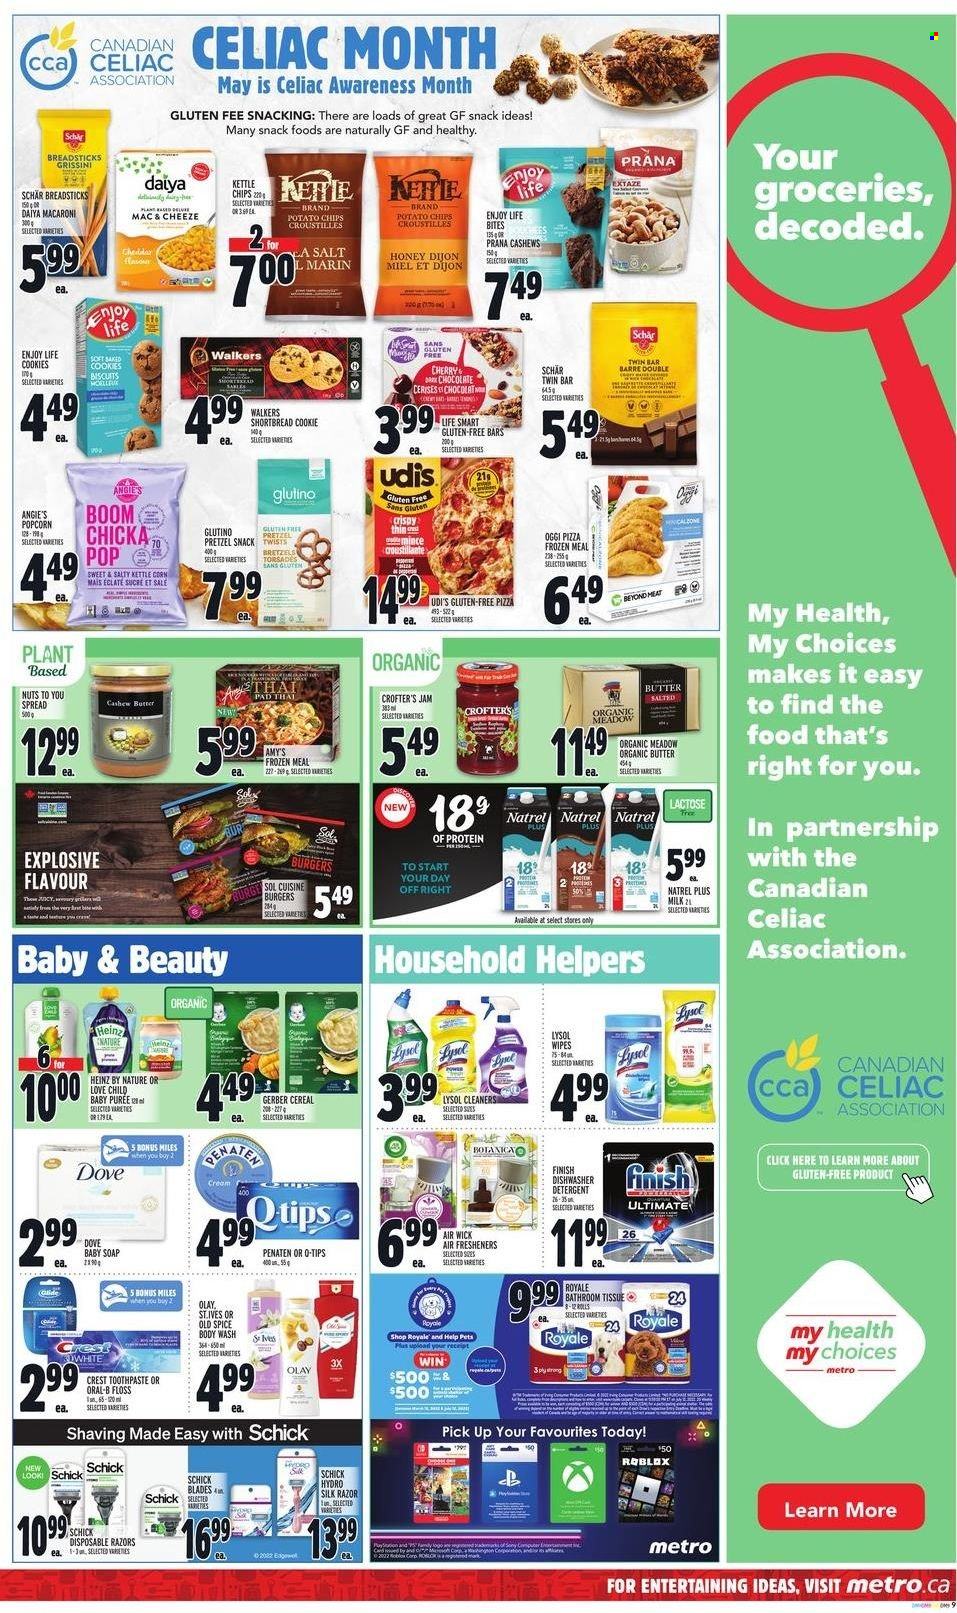 thumbnail - Metro Flyer - May 19, 2022 - May 25, 2022 - Sales products - pretzels, cherries, pizza, macaroni, hamburger, milk, butter, cookies, chocolate, snack, bread sticks, Gerber, kettle corn, potato chips, popcorn, grissini, cereals, spice, honey, fruit jam, cashew cream, tea, wipes, bath tissue, Lysol, body wash, soap, Crest, Olay, razor, Schick, air freshener, Air Wick, detergent, Dove, Heinz, Old Spice. Page 8.